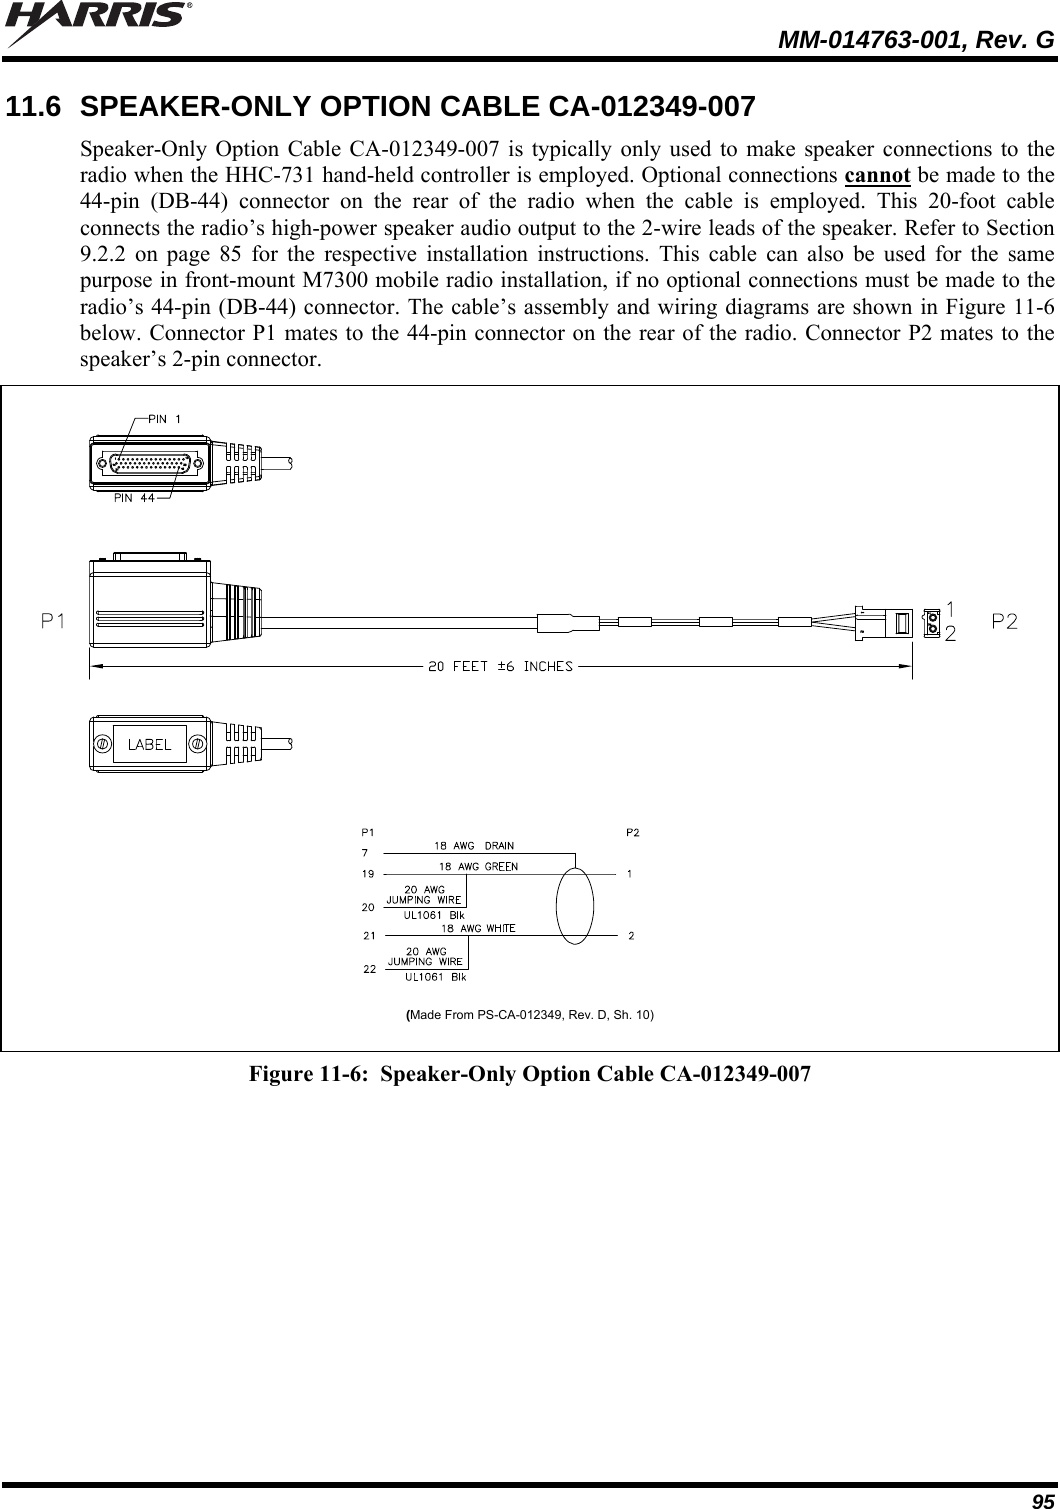   MM-014763-001, Rev. G 95 11.6  SPEAKER-ONLY OPTION CABLE CA-012349-007 Speaker-Only Option Cable CA-012349-007 is typically only used to make speaker connections to the radio when the HHC-731 hand-held controller is employed. Optional connections cannot be made to the 44-pin (DB-44) connector on the rear of the radio when the cable is employed. This 20-foot cable connects the radio’s high-power speaker audio output to the 2-wire leads of the speaker. Refer to Section 9.2.2 on page 85 for the respective installation instructions. This cable can also be used for the same purpose in front-mount M7300 mobile radio installation, if no optional connections must be made to the radio’s 44-pin (DB-44) connector. The cable’s assembly and wiring diagrams are shown in Figure 11-6 below. Connector P1 mates to the 44-pin connector on the rear of the radio. Connector P2 mates to the speaker’s 2-pin connector.    (Made From PS-CA-012349, Rev. D, Sh. 10)  Figure 11-6:  Speaker-Only Option Cable CA-012349-007  